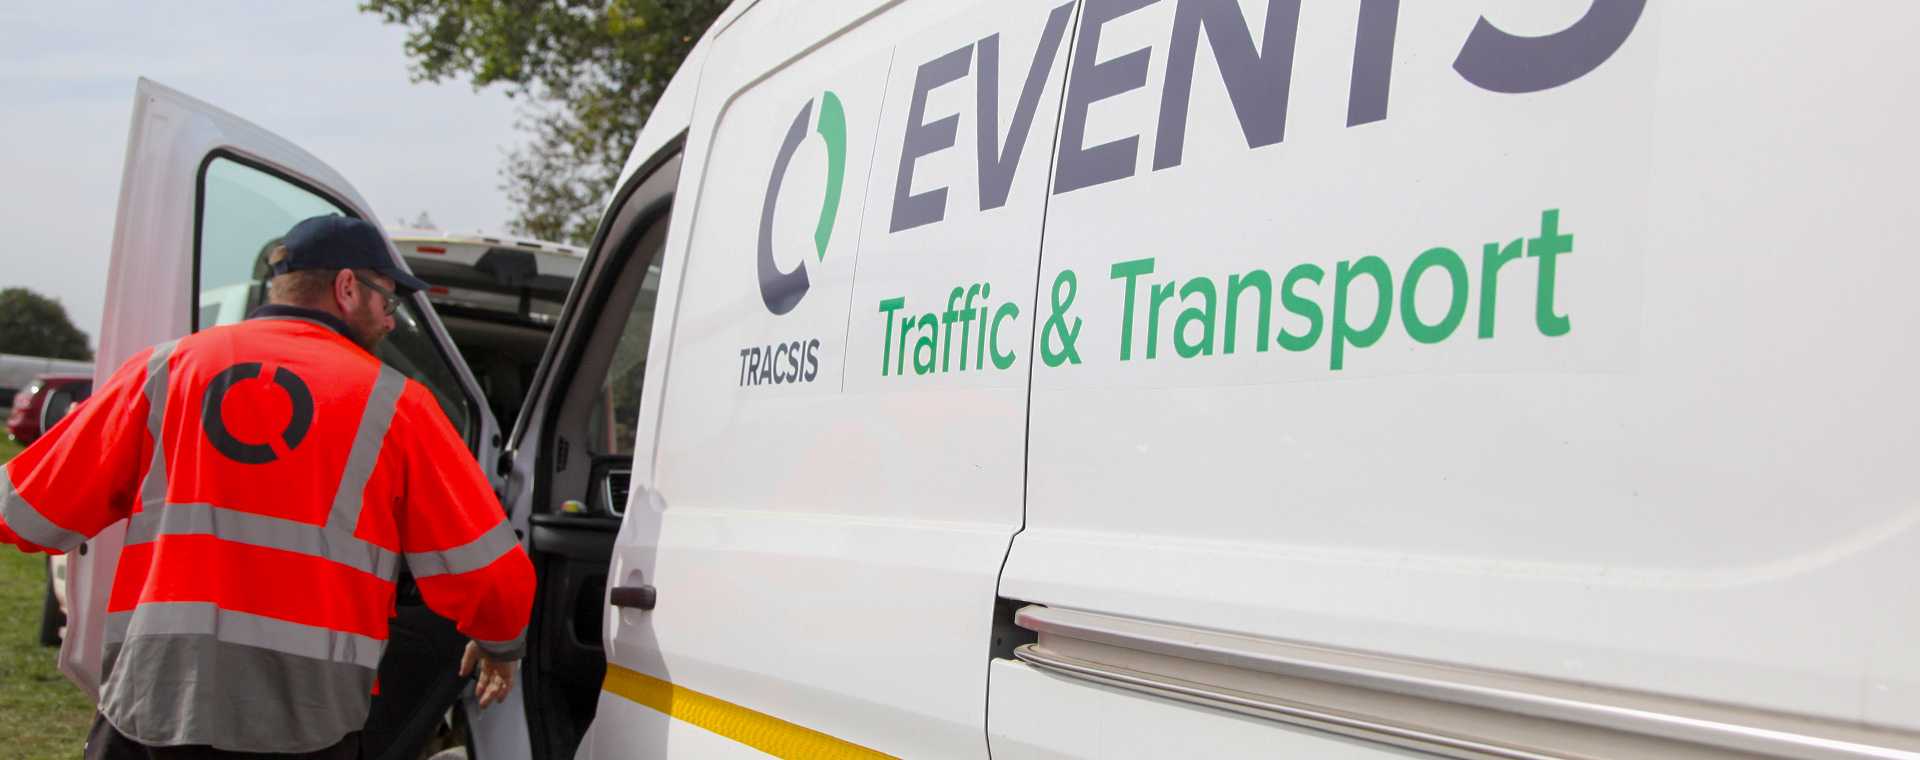 A person exiting a Tracsis Events Traffic and Transport van